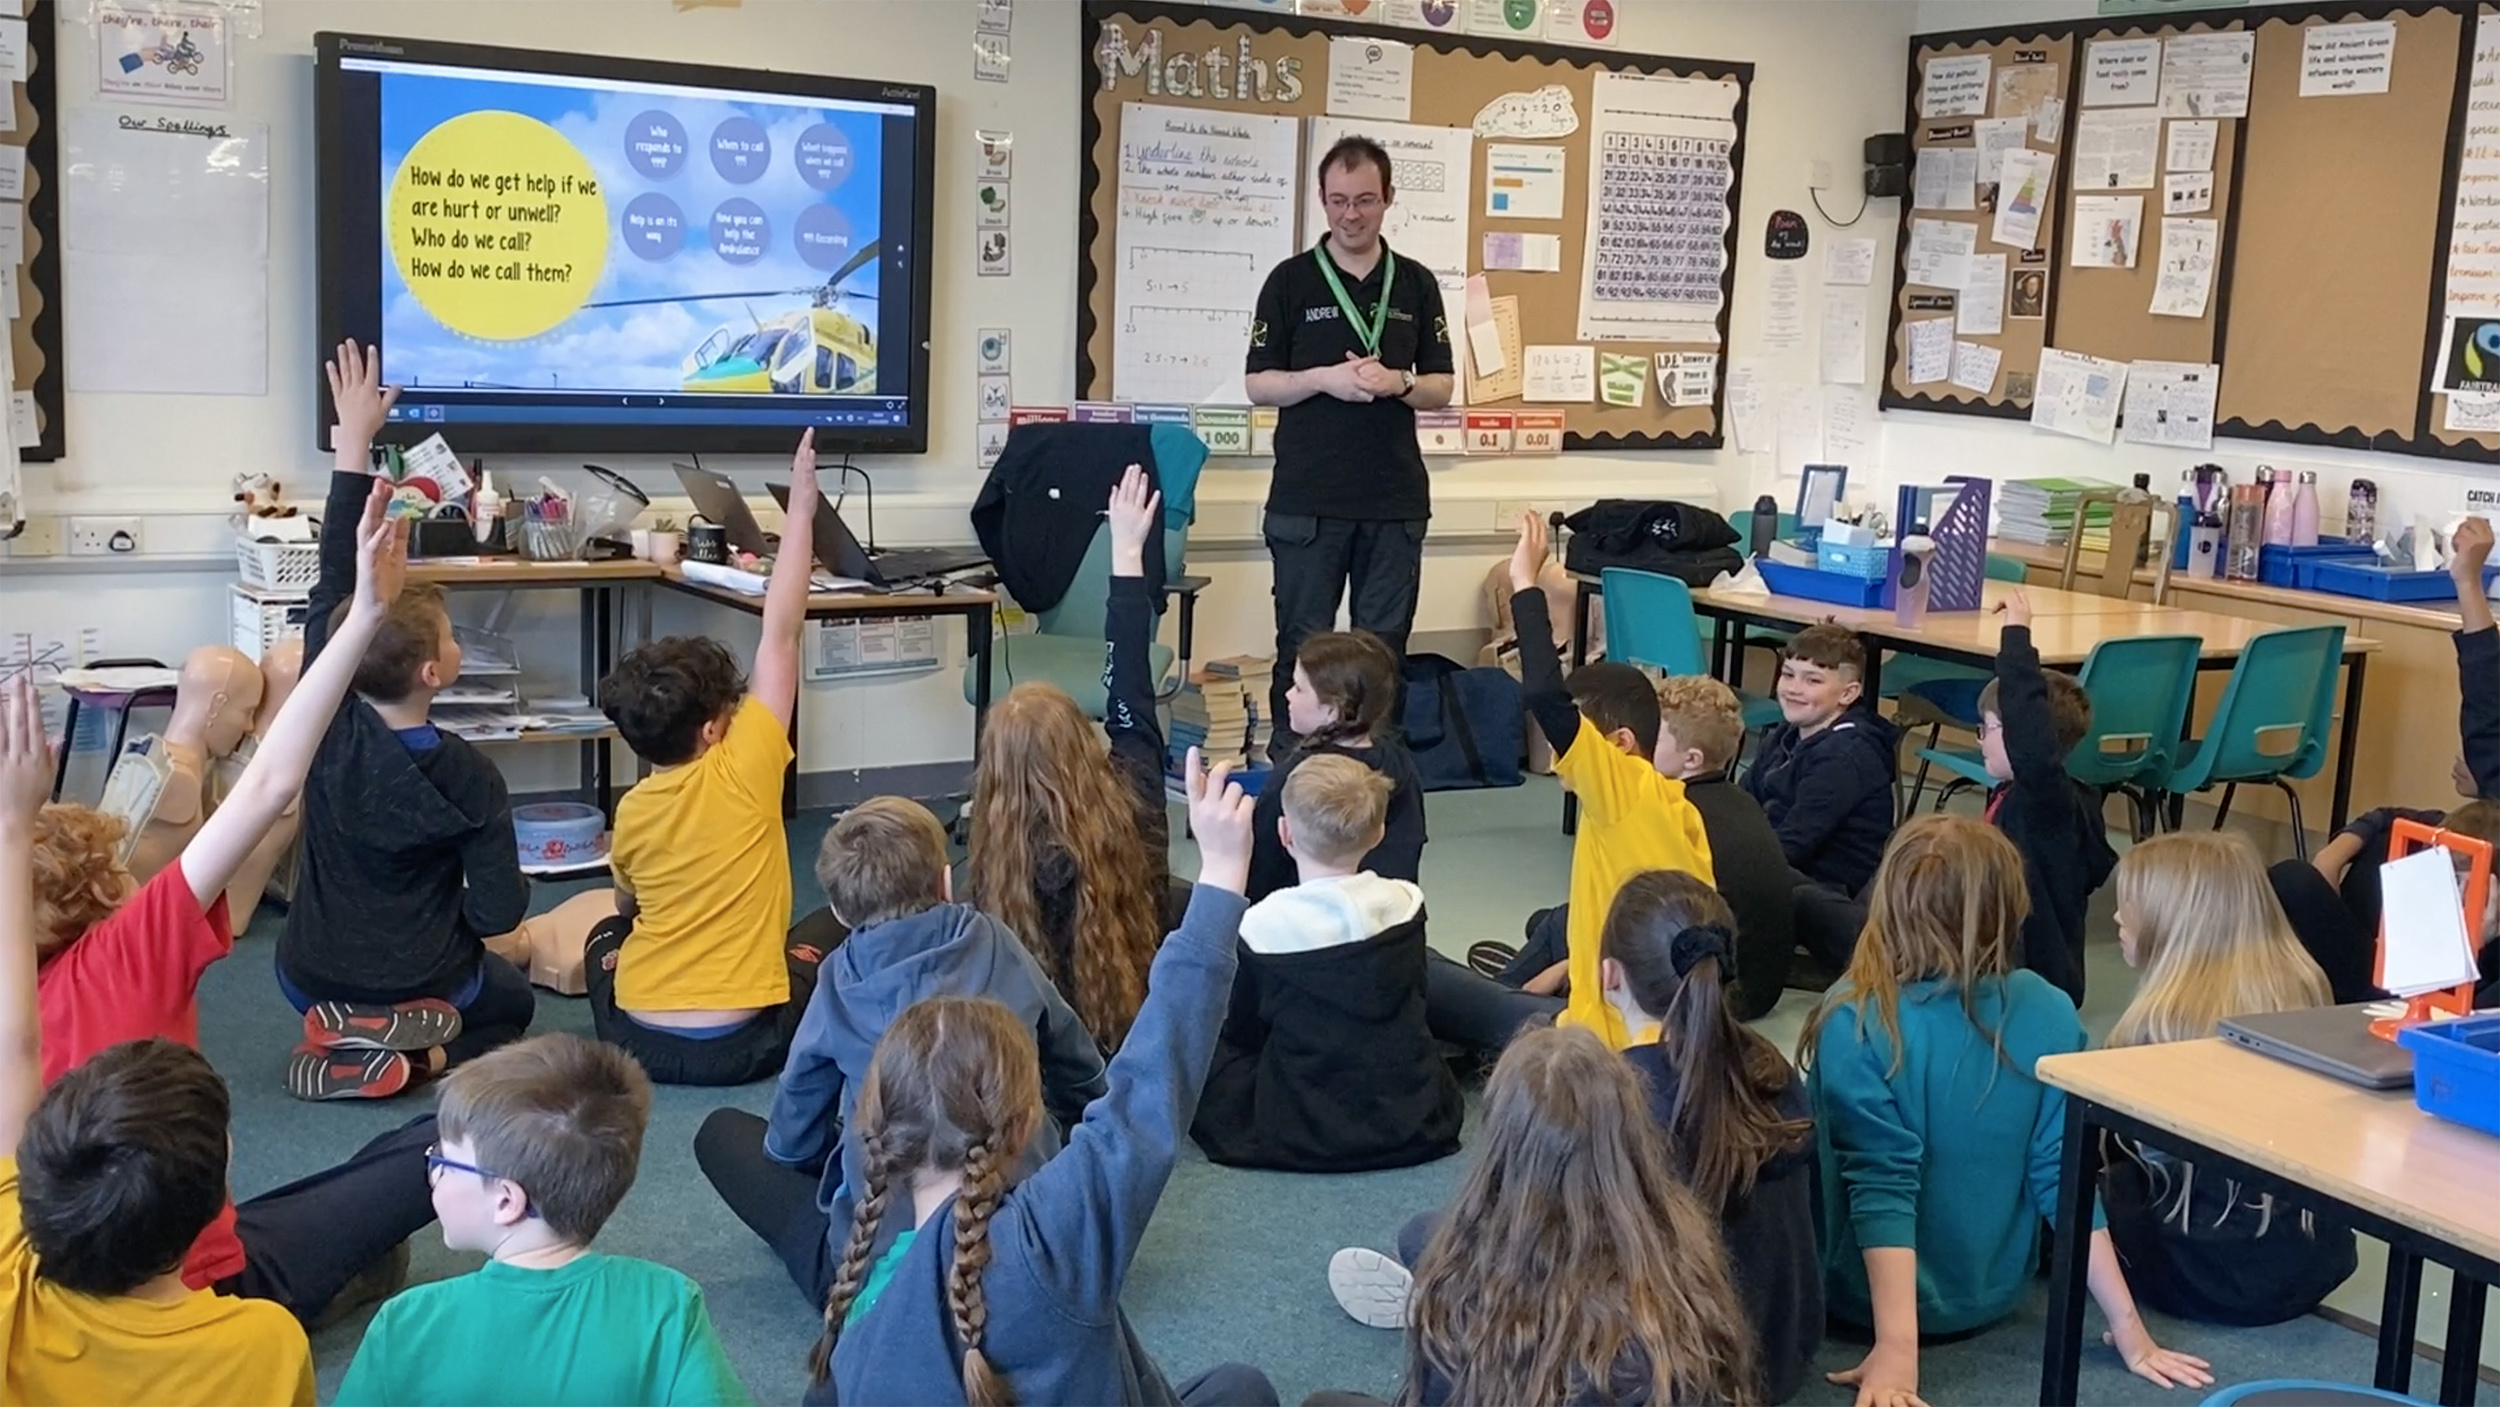 Trainer delivering emergency awareness training to a class of school children, who are sat on the floor with their hands up